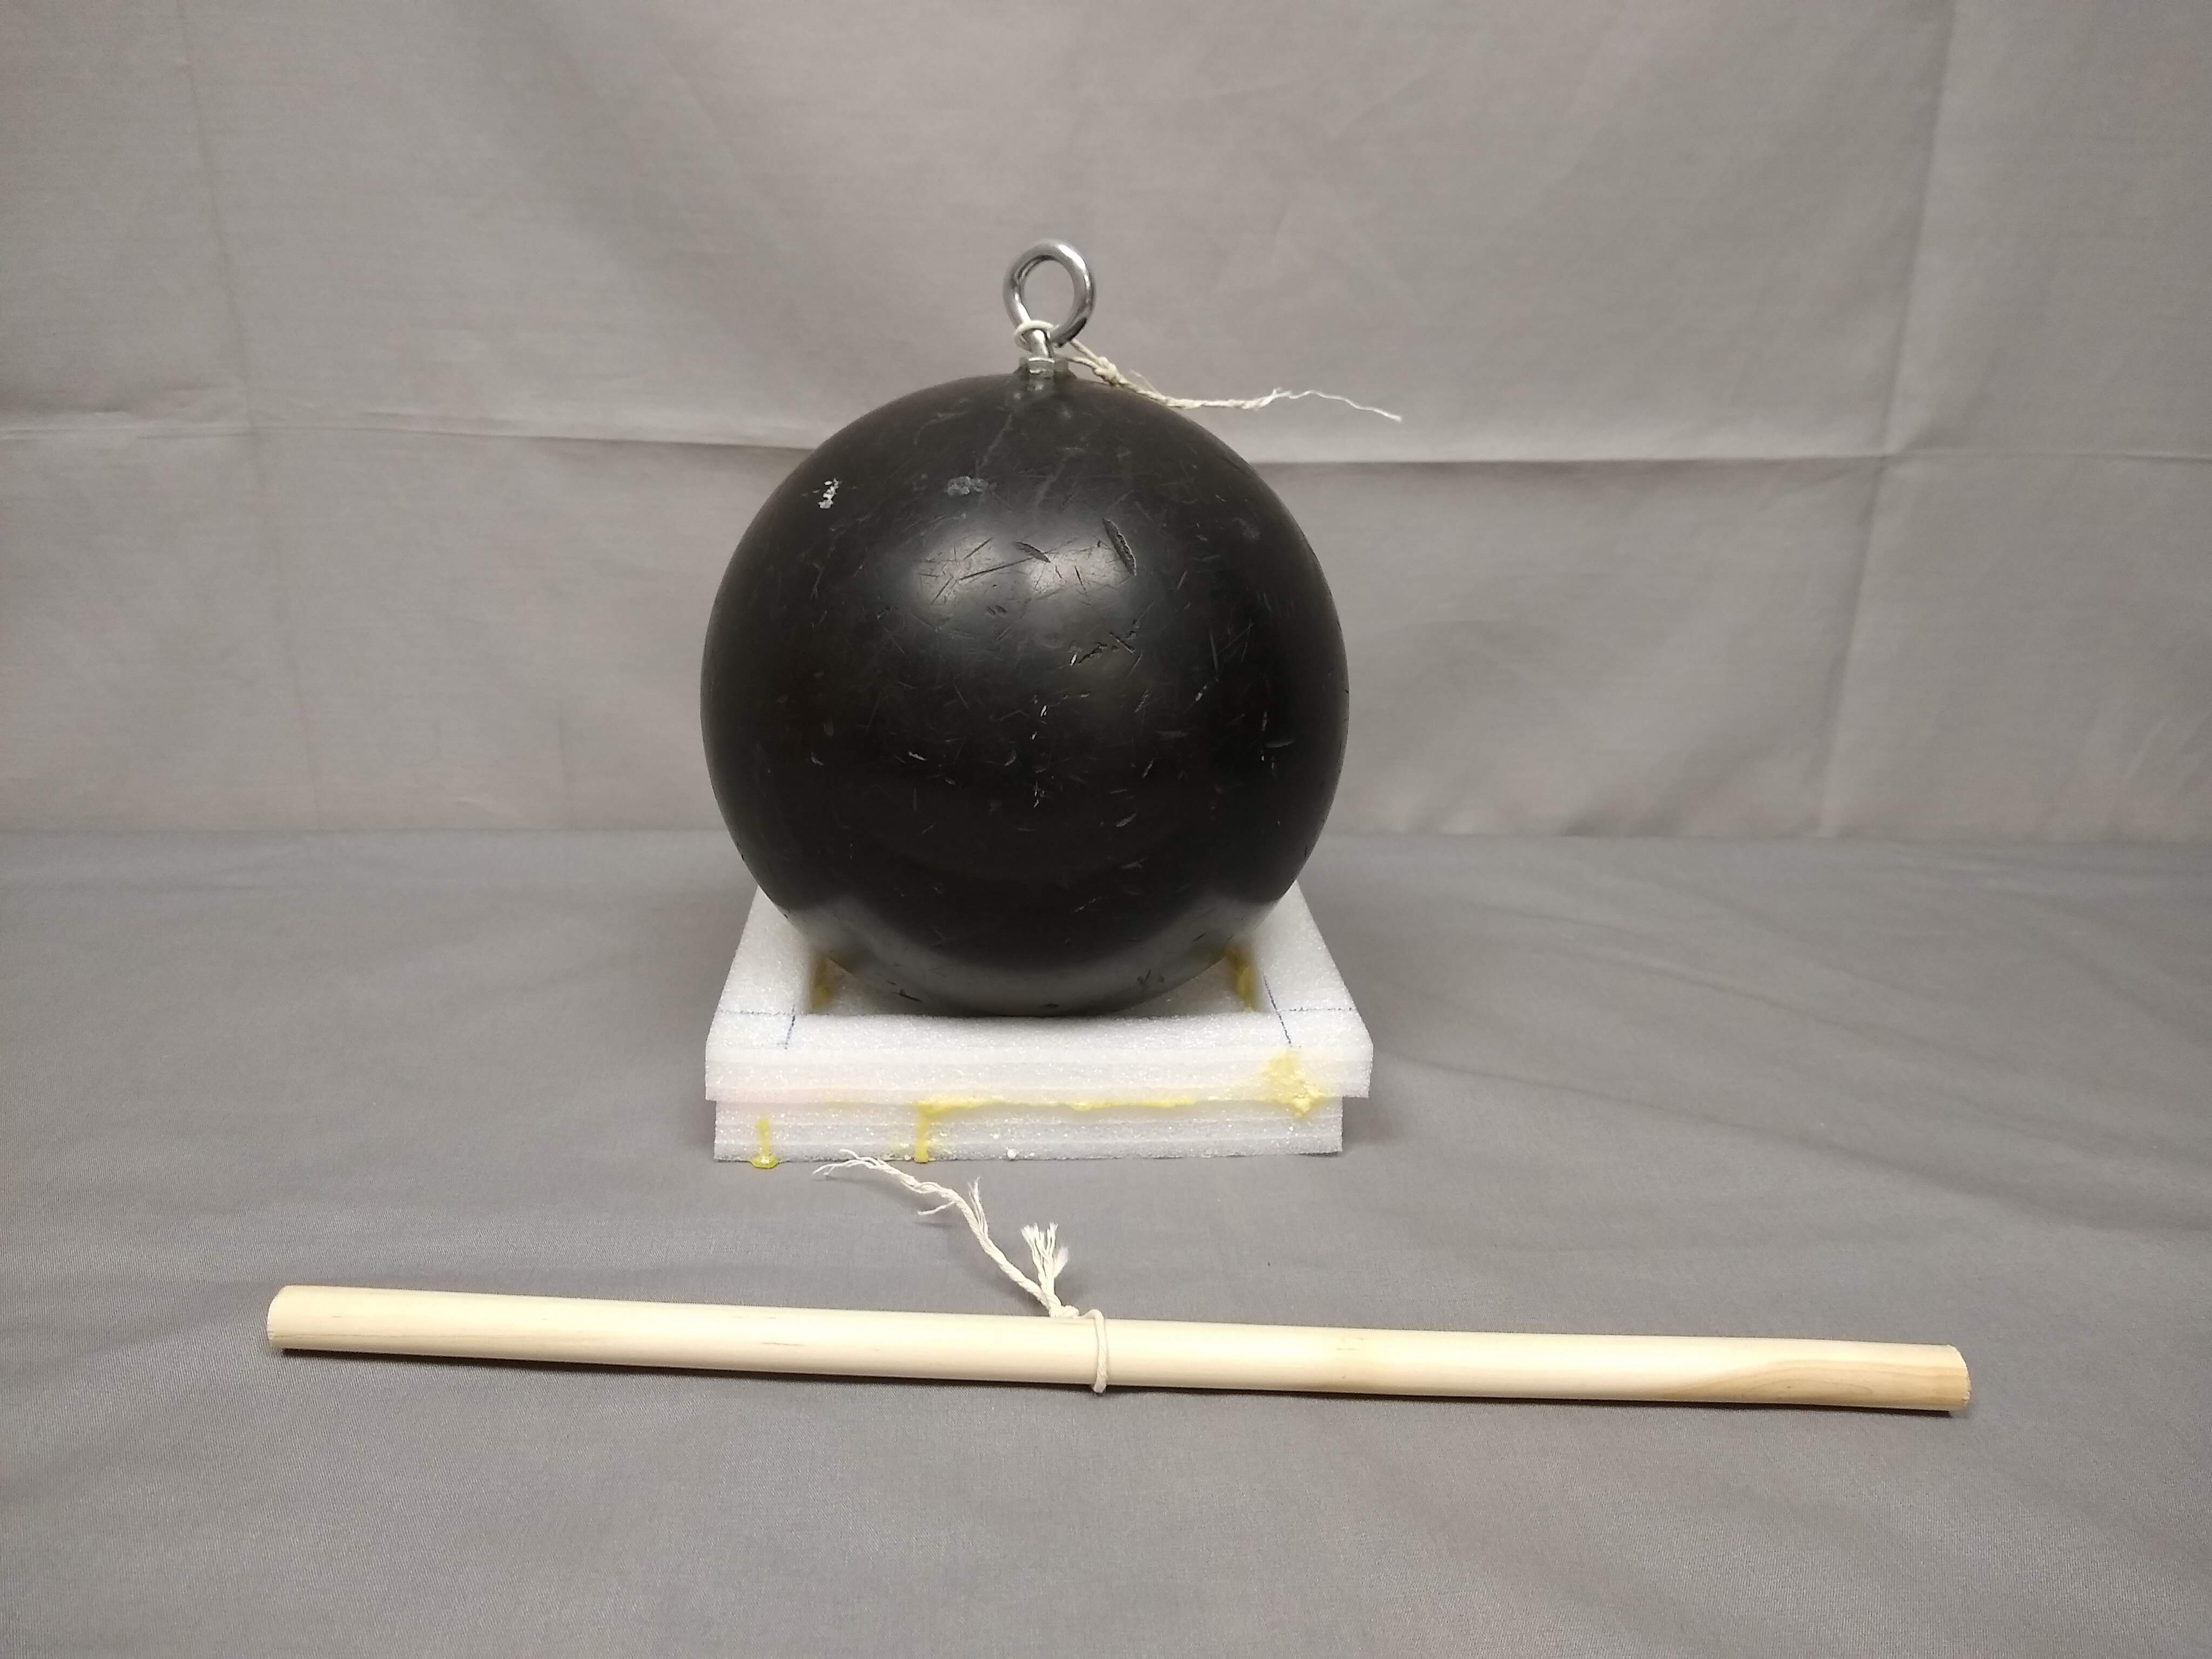 Bowling ball string broken after attempting to accelerate quickly.